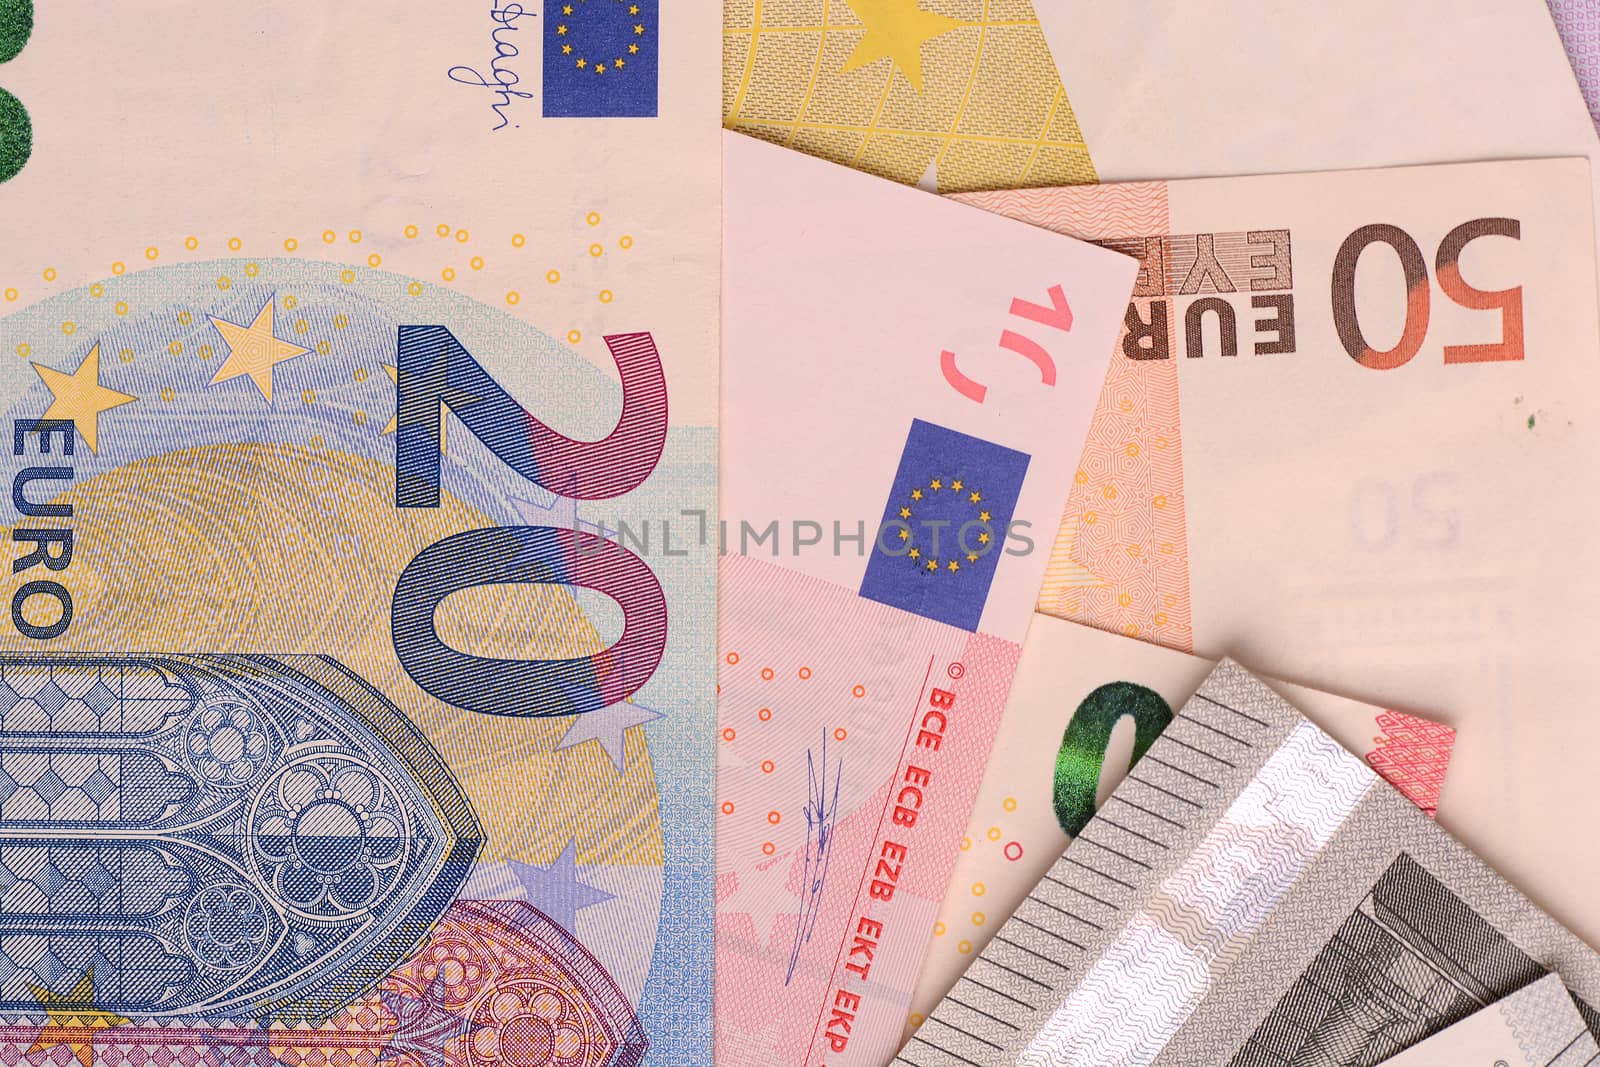 Euro money bank for your budget to investment.